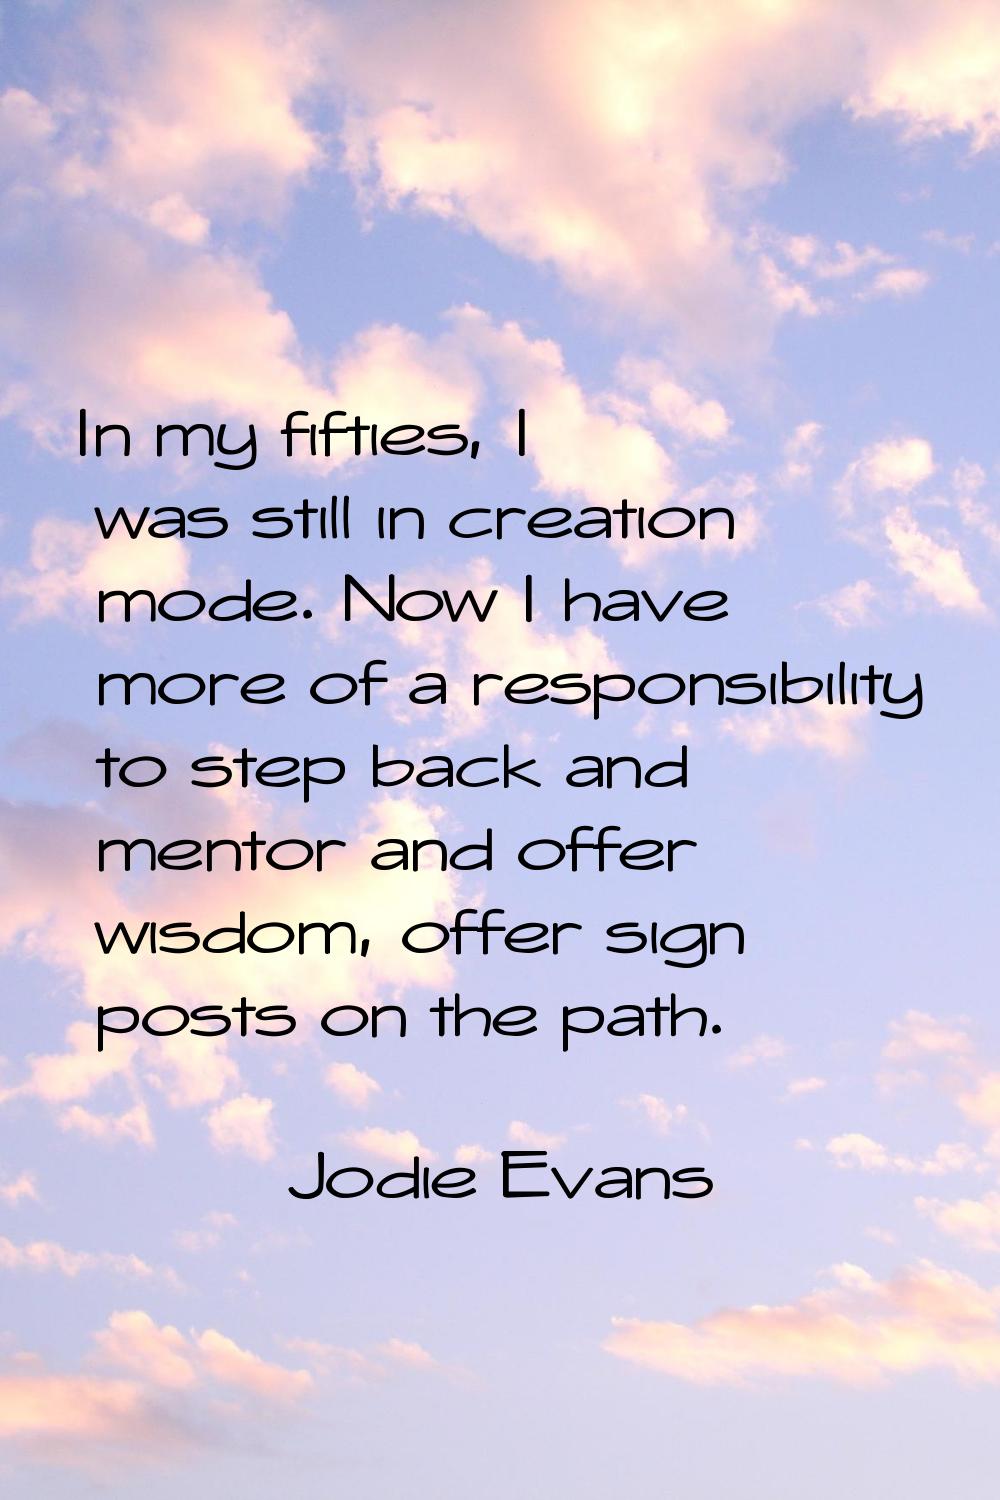 In my fifties, I was still in creation mode. Now I have more of a responsibility to step back and m